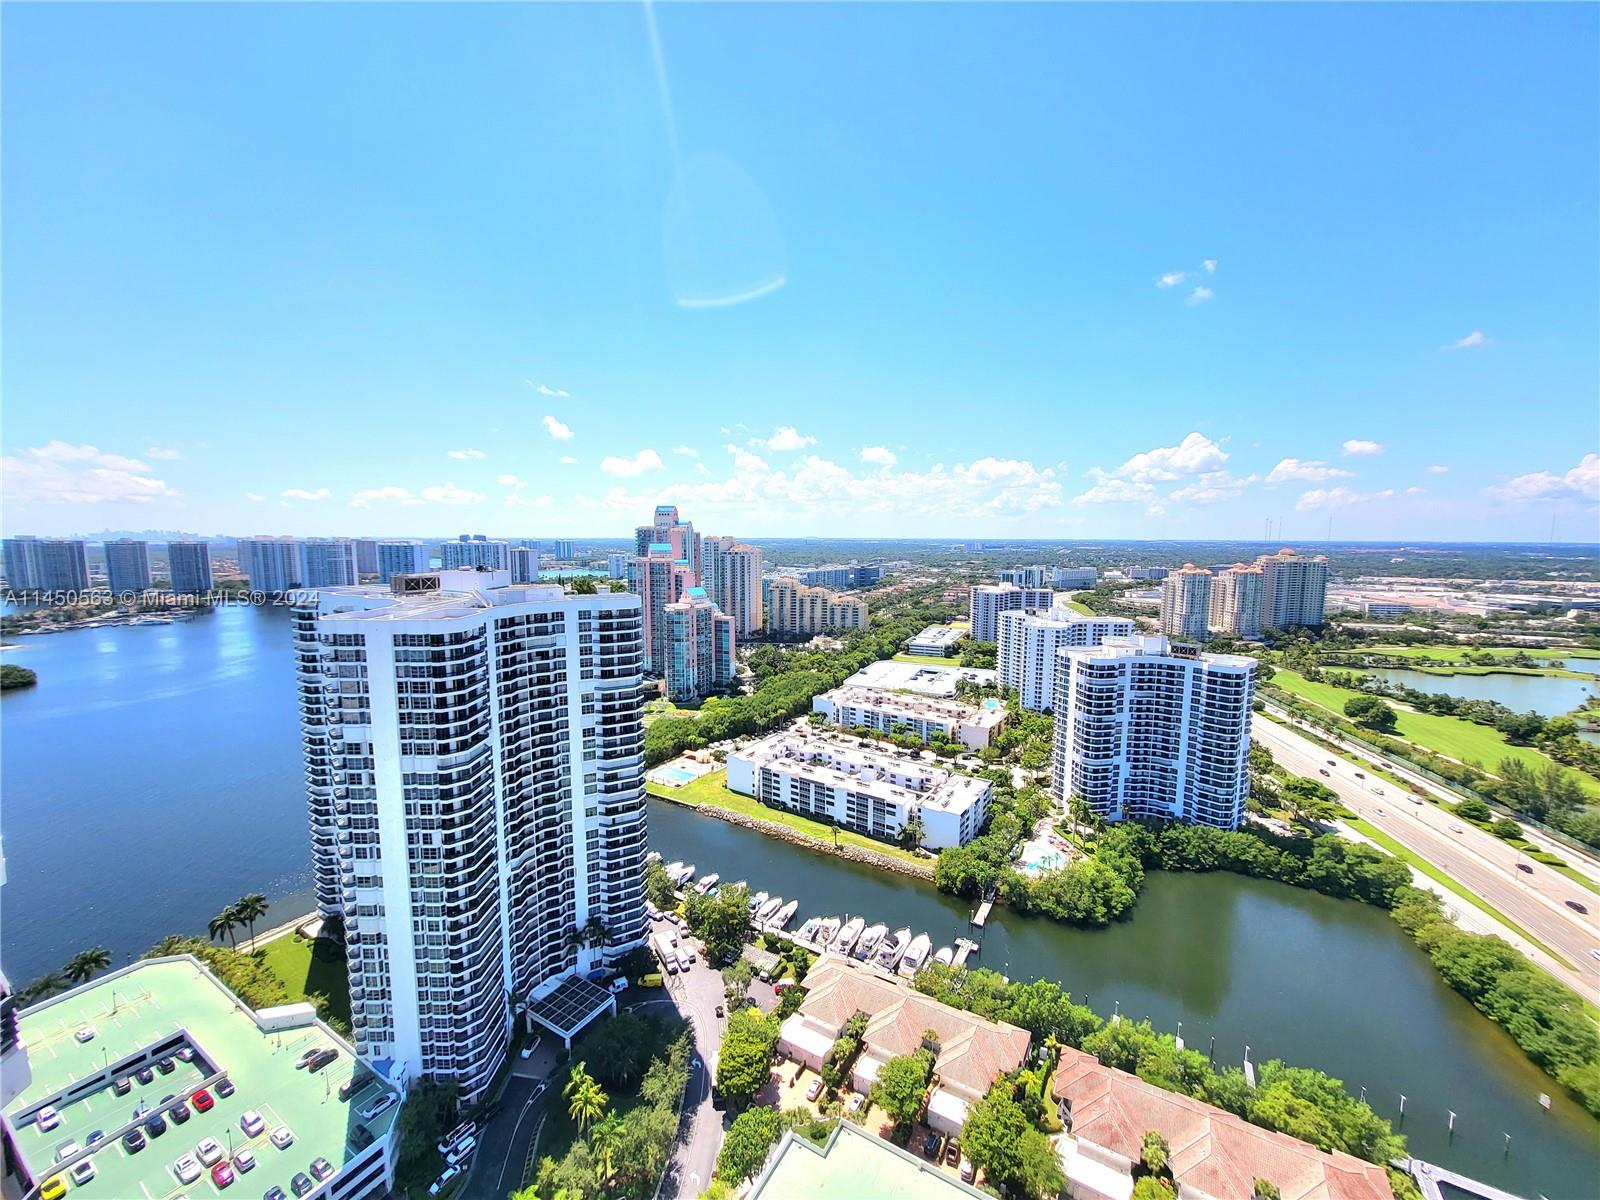 OWNER MOTIVATED - PRICE REDUCED - EASY TO VIEW -  Mystic Pointe condo in Aventura, 2 Parking Spaces and Storage unmatched amenities like an option for boat slip rentals at the private marina, this gem is a 7-minute drive to the beach and next to Sunny Isles. Recreational facilities abound with tennis courts, an Olympic-size pool, a sauna, and a gym. Top-rated schools, diverse dining, and shopping—including a 5-minute drive to Aventura Mall and 10 to Gulfstream Park. Retreat to a spacious master suite equipped with a walk-in closet, and dual vanity areas. Mystic Pointe's secure, additional amenities such as pickleball, basketball, a playground, a dog park, and a waterfront walking path. include a restaurant, salon, mini-mart, and 24/7 security. Your new sanctuary of comfort and luxury.